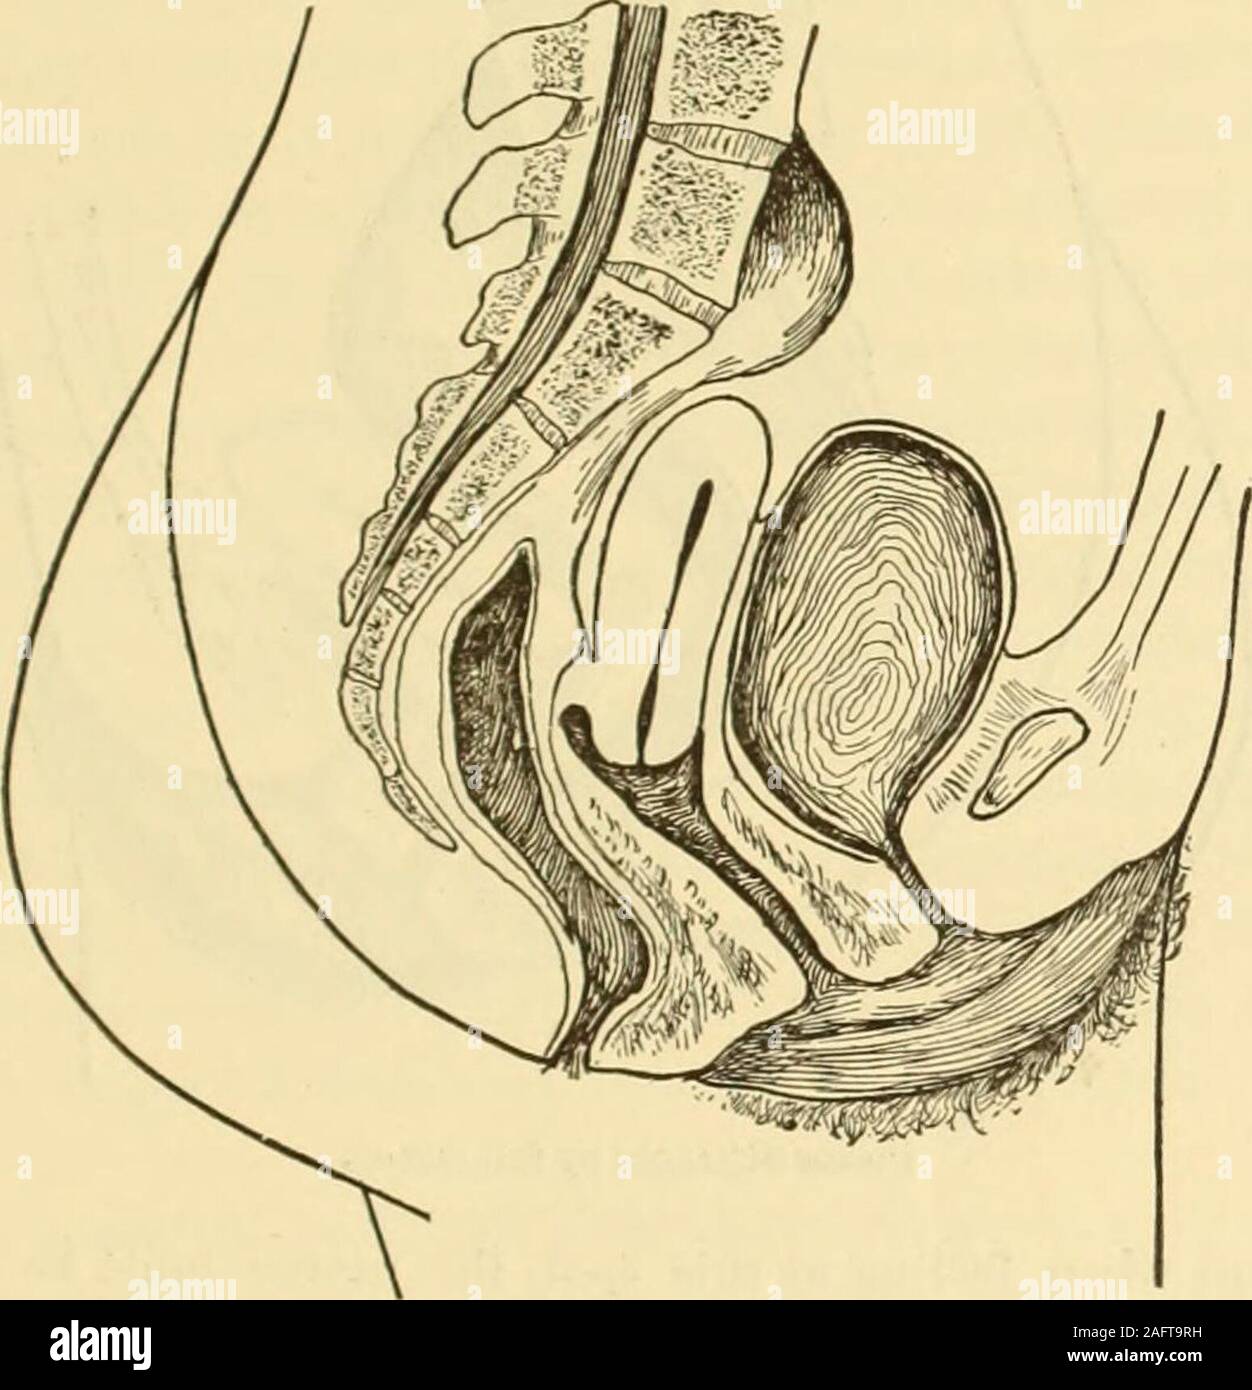 . Clinical gyncology, medical and surgical. Normal mobility of uterus (diagrammatic). DISPLACEMENTS OF THE UTERUS. 467 vanced is that some authors have not taken into account the feet that in itsphysiological condition the uterus is a movable organ subject to all thevariations of position which are dependent upon the different degrees offulness of the bladder and of the rectum and the movements of expirationand inspiration and of increased or diminished intra-abdominal pressure.The other reason why authors differ or have differed in their descriptionof the normal position of the uterus is that Stock Photo